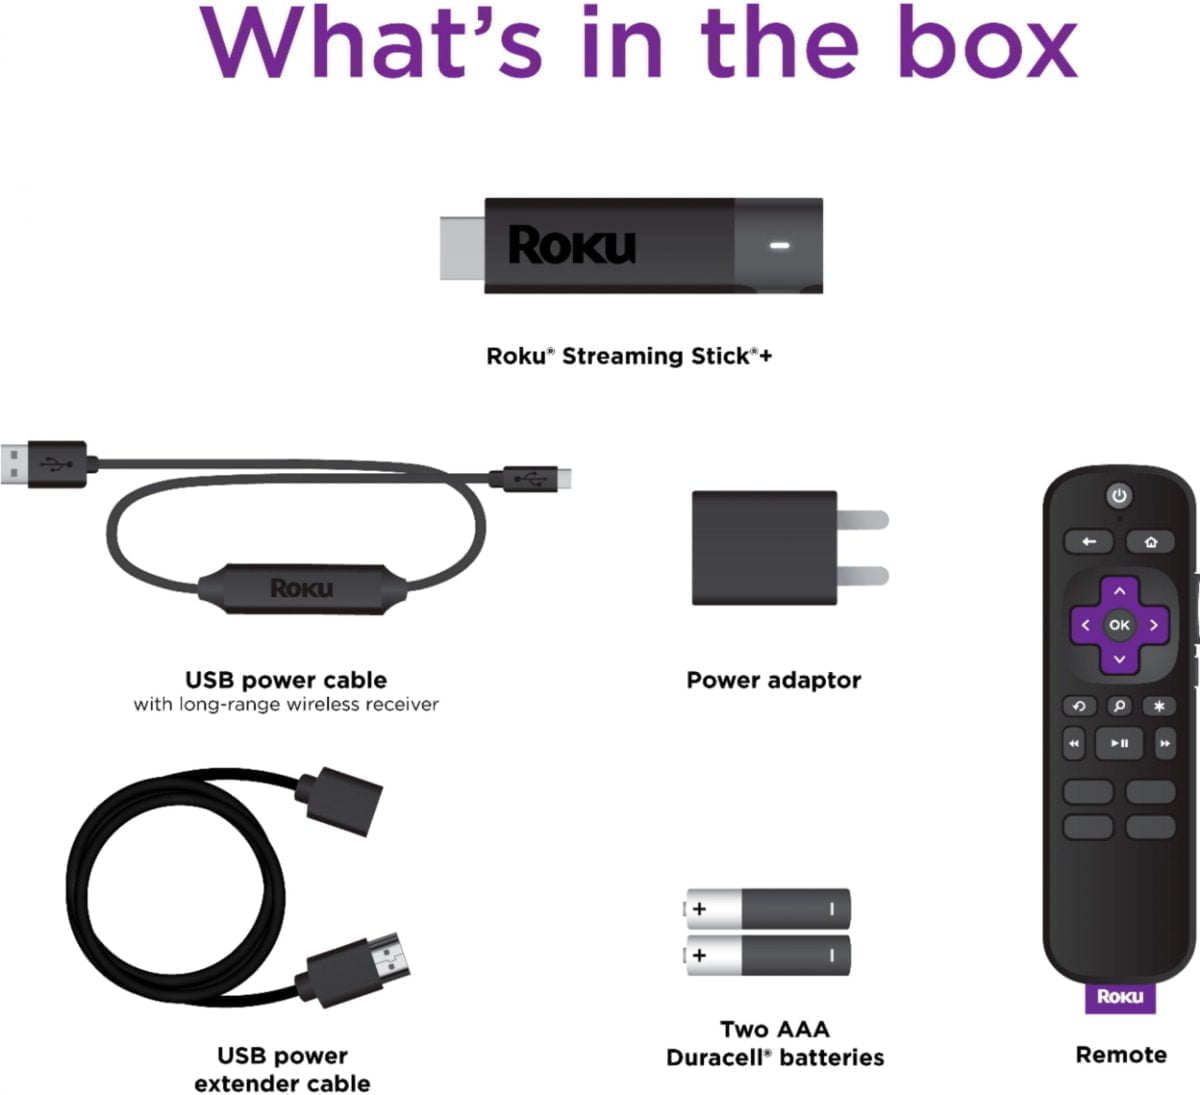 5948005Cv11D Scaled Roku &Lt;H1&Gt;Roku Streaming Stick+ 4K Streaming Media Player With Voice Remote With Tv Controls - Black&Lt;/H1&Gt; Enjoy Nonstop Entertainment With The Roku Streaming Stick+. Its Wireless Receiver Provides A Strong Signal For Smooth Streaming In Rooms Far From The Router, And It Supports 4K, Hd And Hdr Resolutions For Crisp, Colorful Pictures. Take This Compact Roku Streaming Stick+ With You On Vacation For Enjoying Shows Away From Home. Roku Streaming Stick+ 4K Streaming Media Player With Voice Remote With Tv Controls - Black